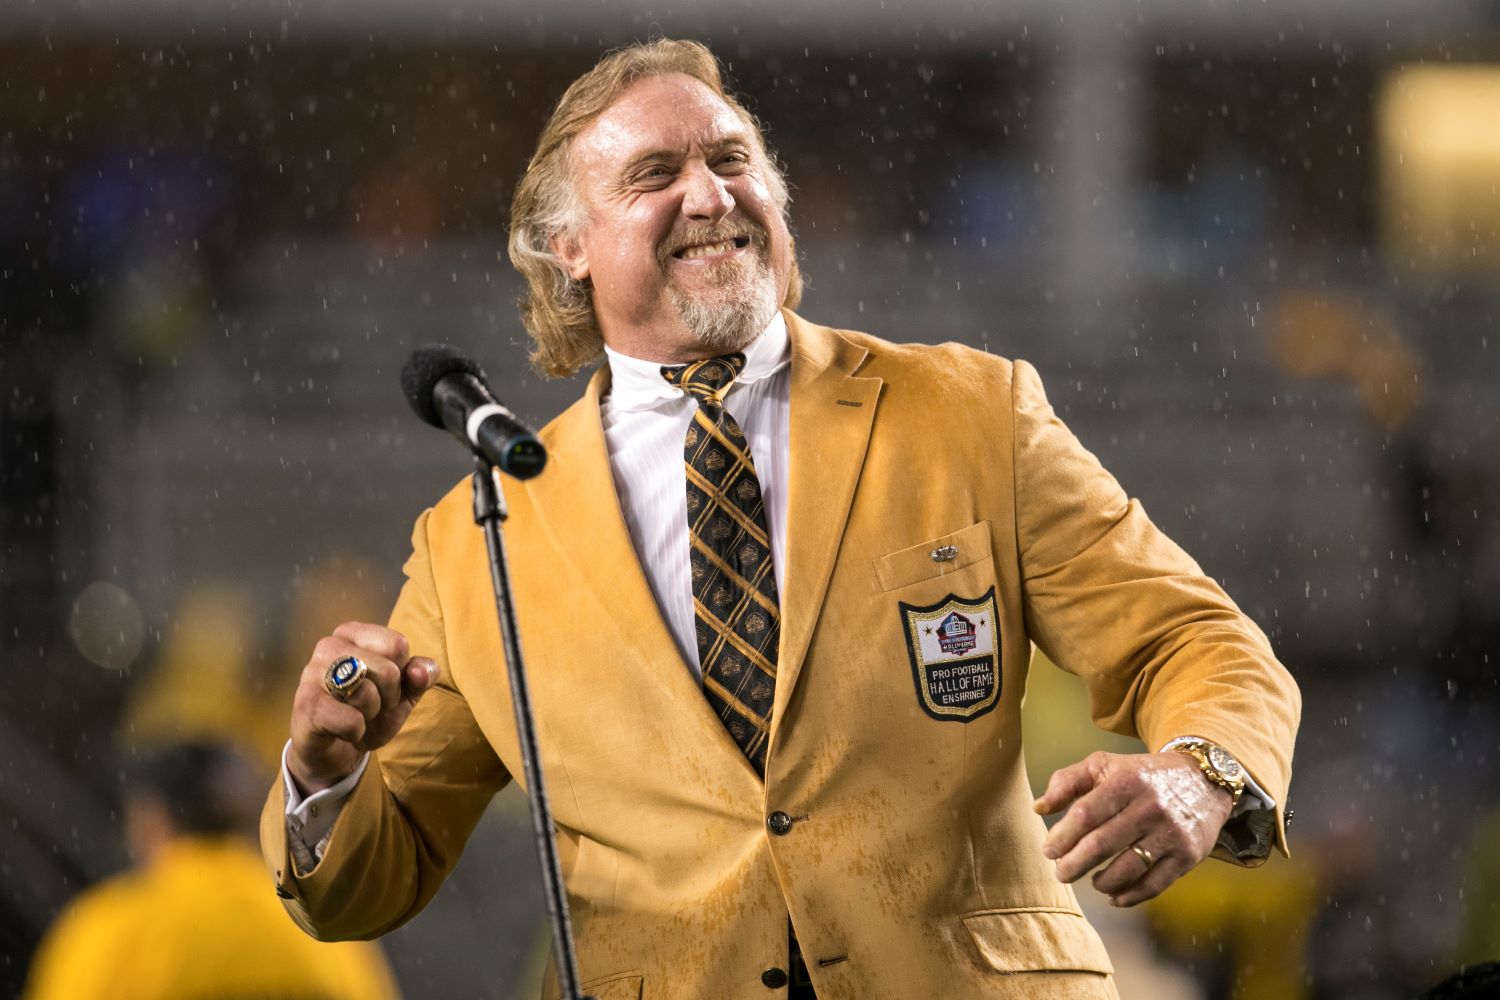 The Pittsburgh Steelers and NFL community as a whole suffered a tragic loss on Monday with the sudden death of Hall of Famer Kevin Greene.